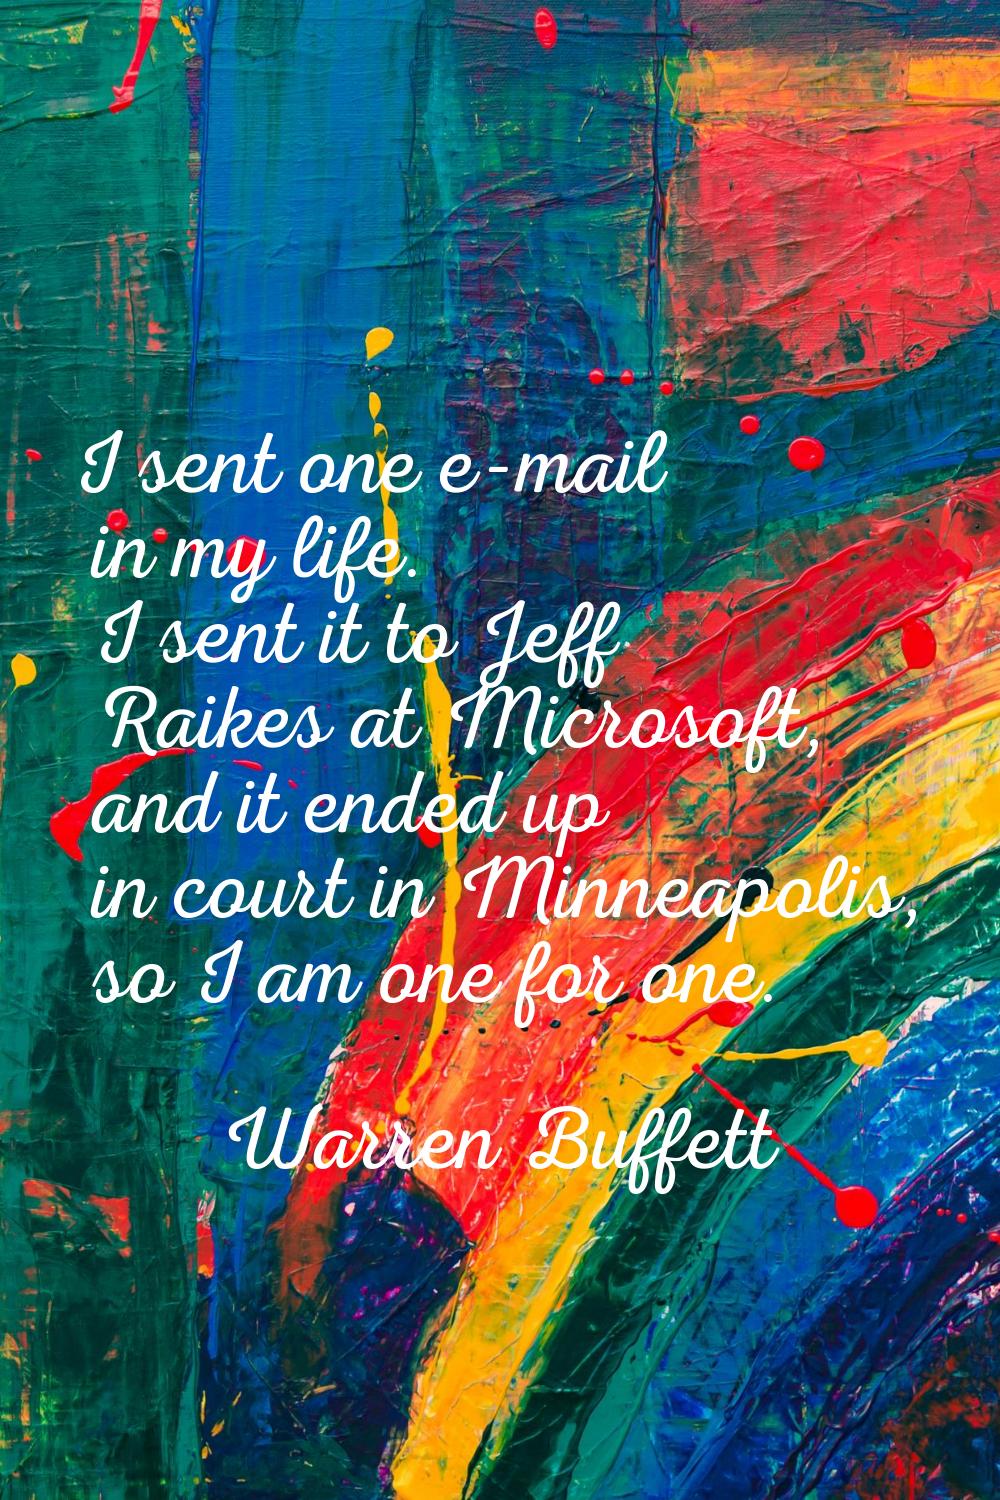 I sent one e-mail in my life. I sent it to Jeff Raikes at Microsoft, and it ended up in court in Mi